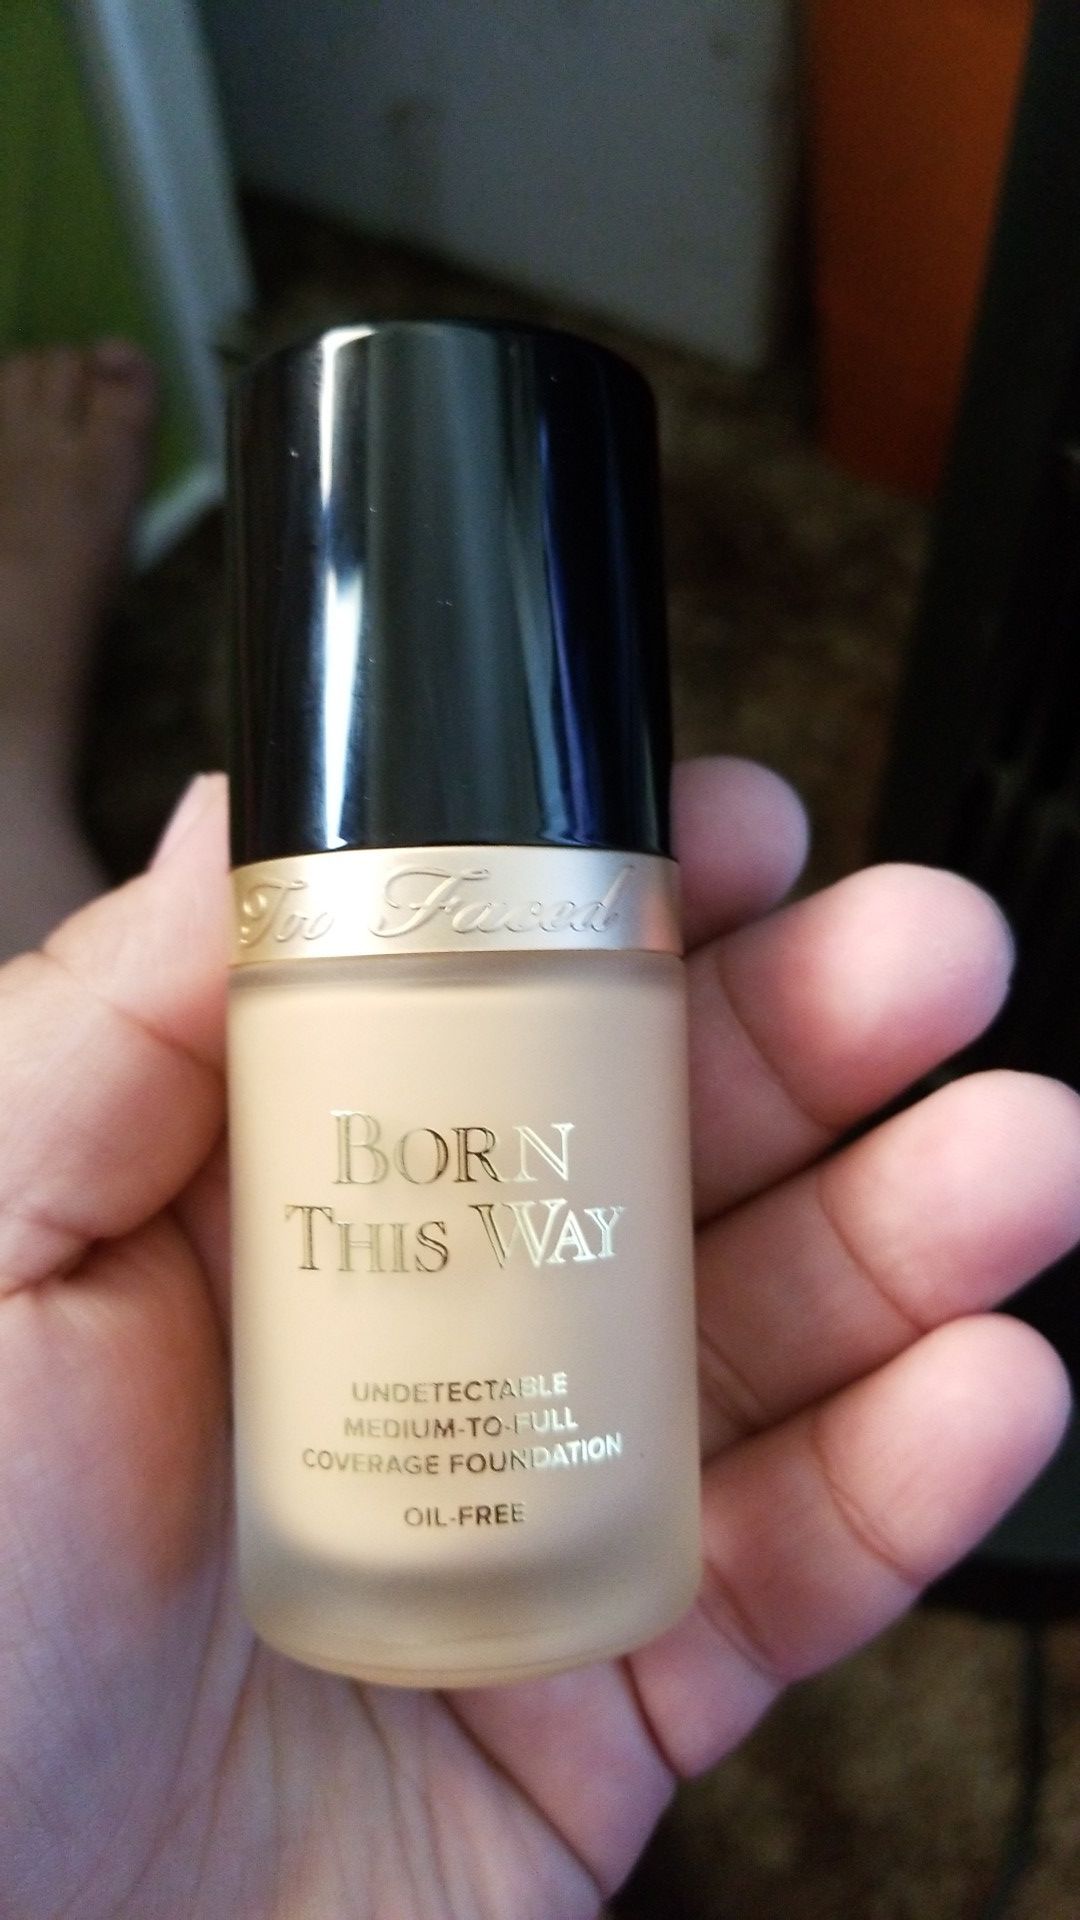 Too Faced Born This Way Foundation in Shade Light Beige